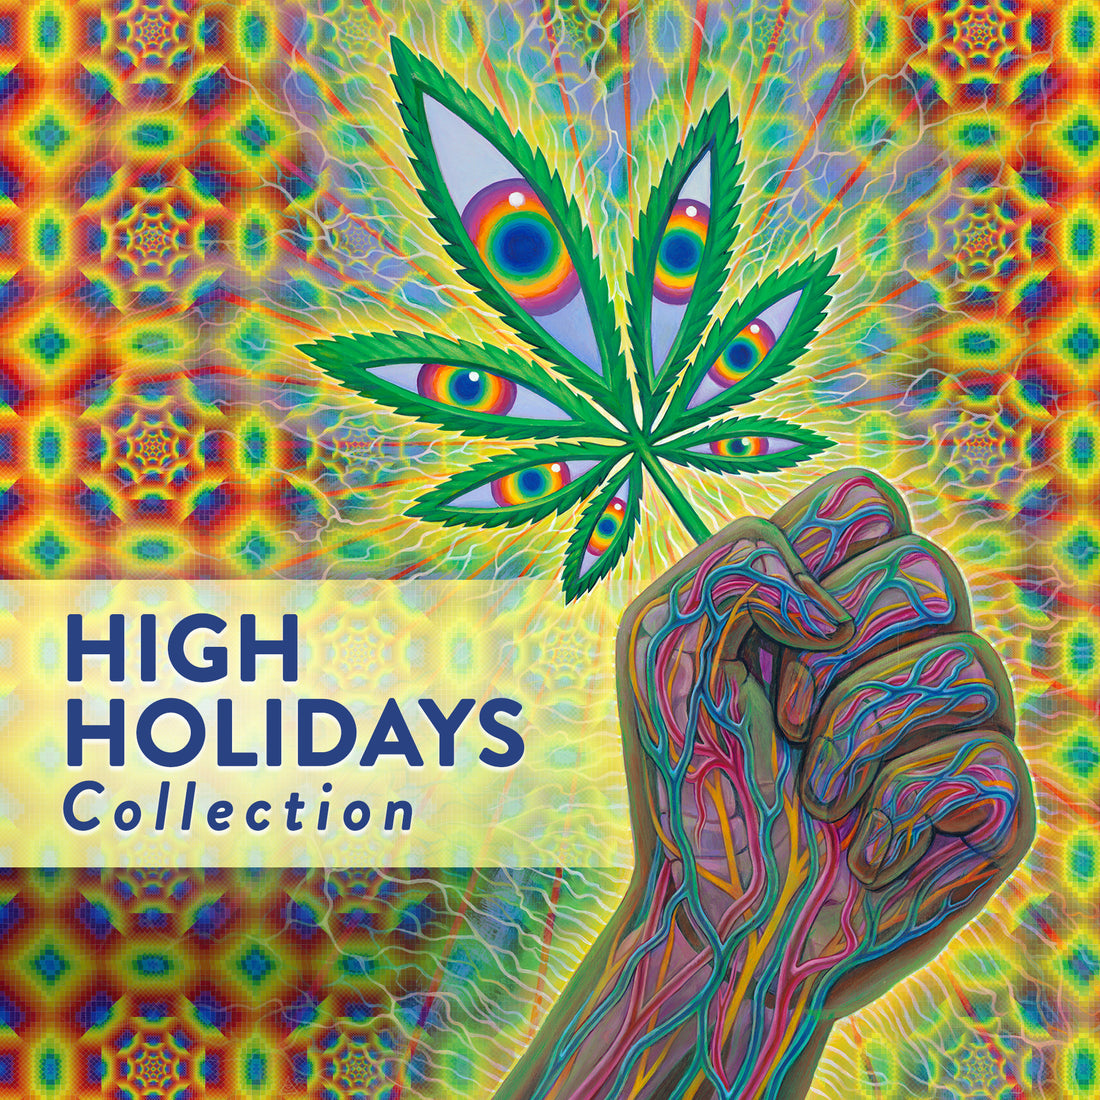 High Holidays at CoSM: Visionary Art and Psychedelic Culture